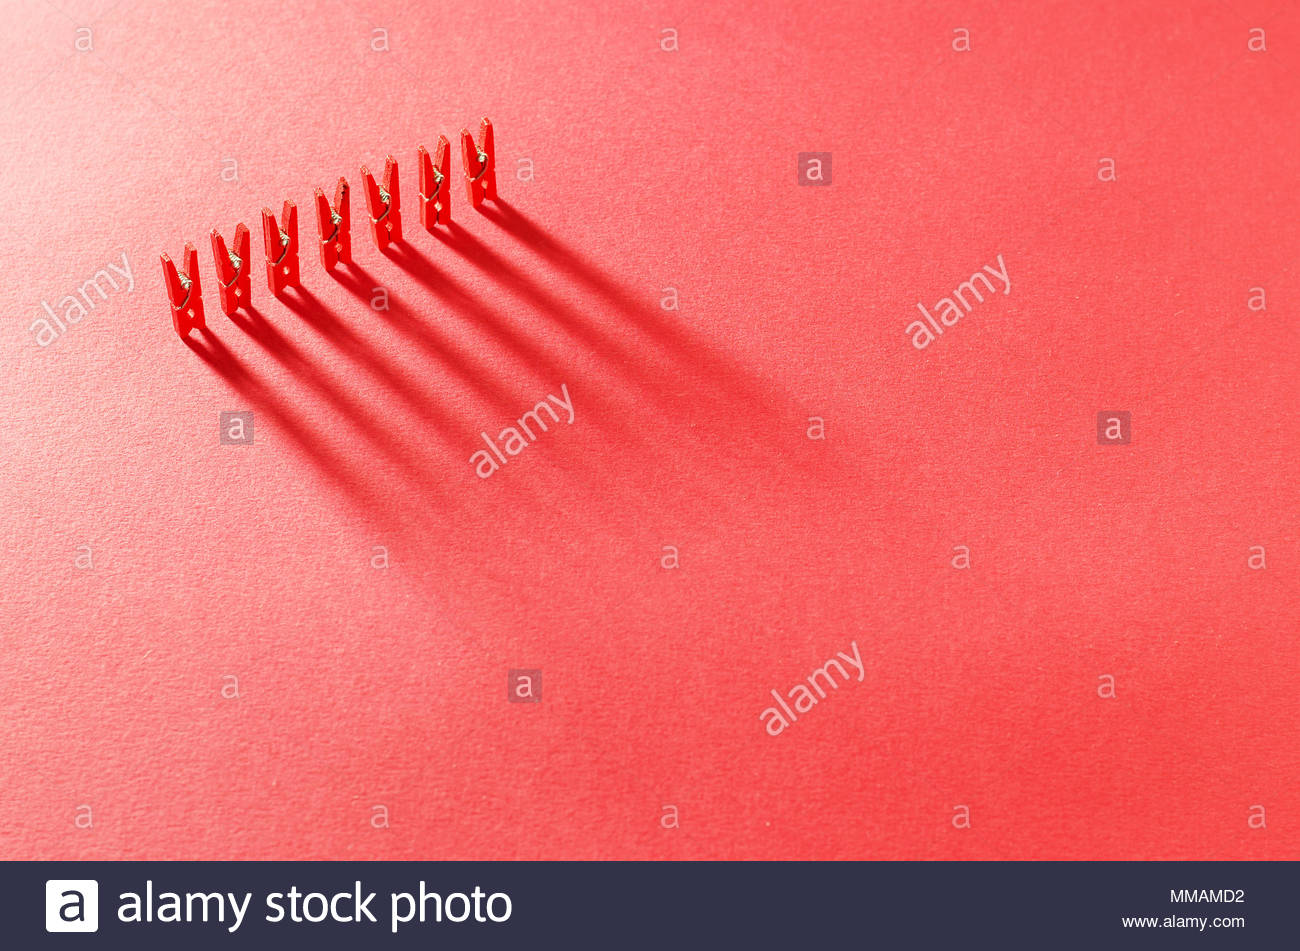 Red Laundry Clips Organized In A Row Over Background Stock